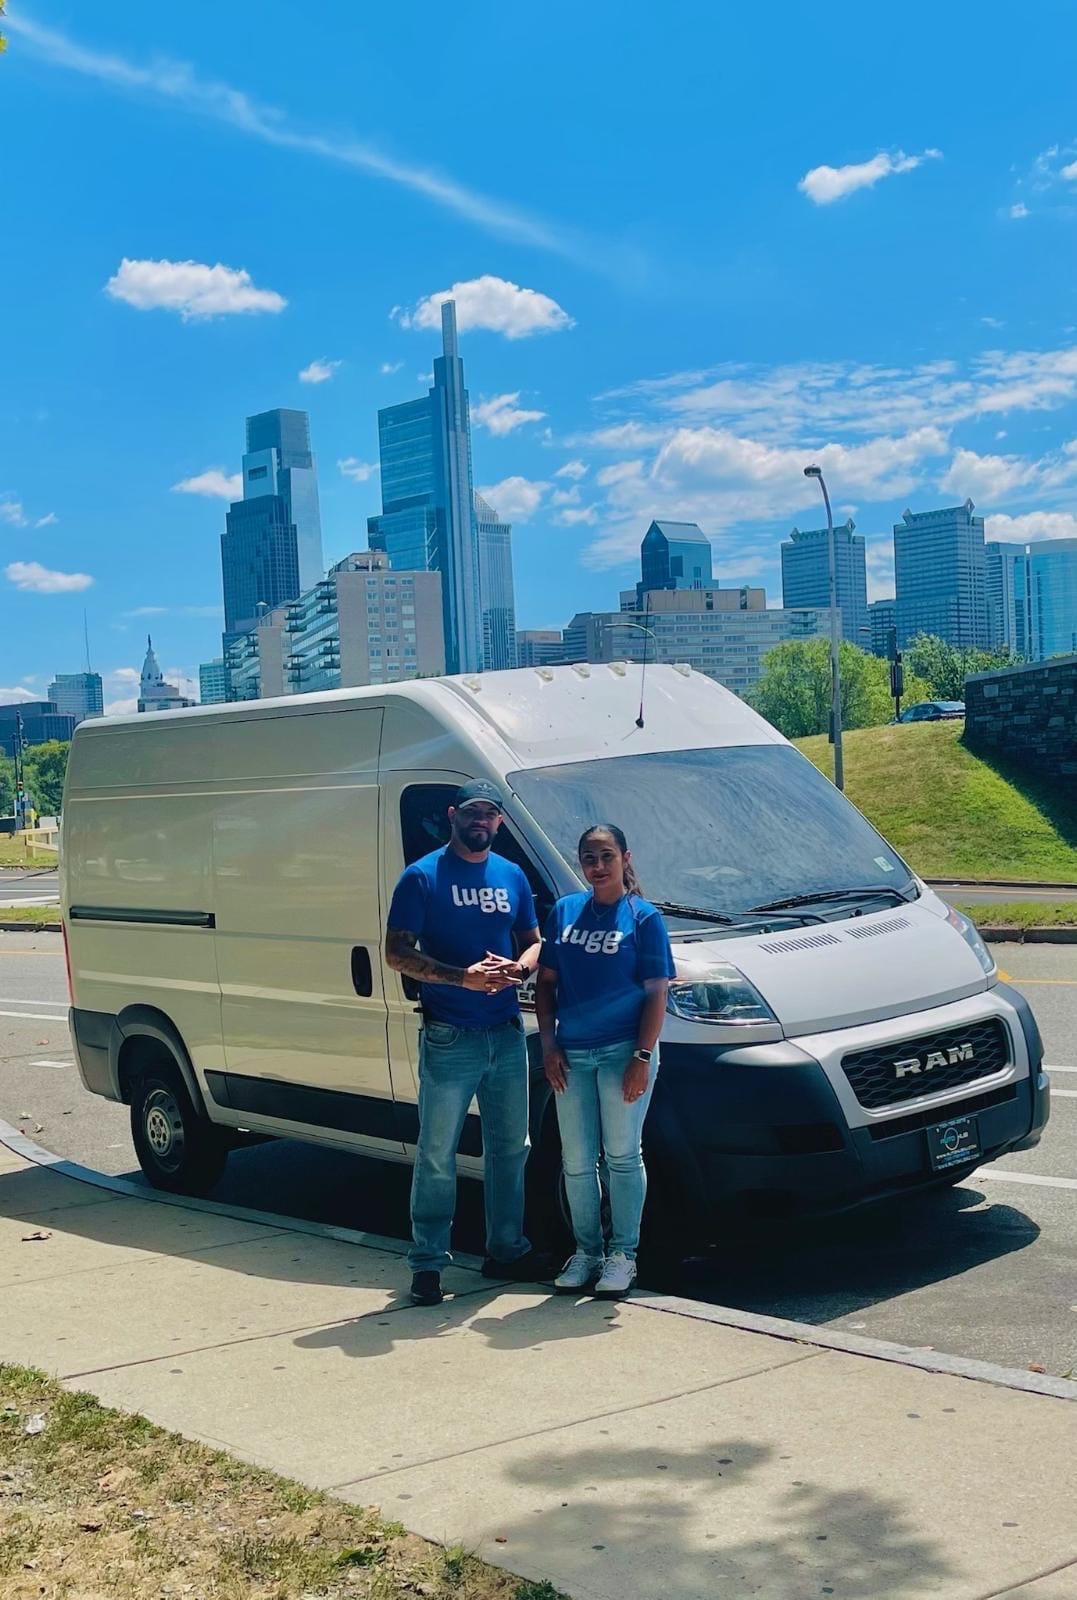 Two Luggers in Philadelphia pose for a photo outside their moving van with the skyline in the background in celebration of Lugg's 3 year anniversary. 